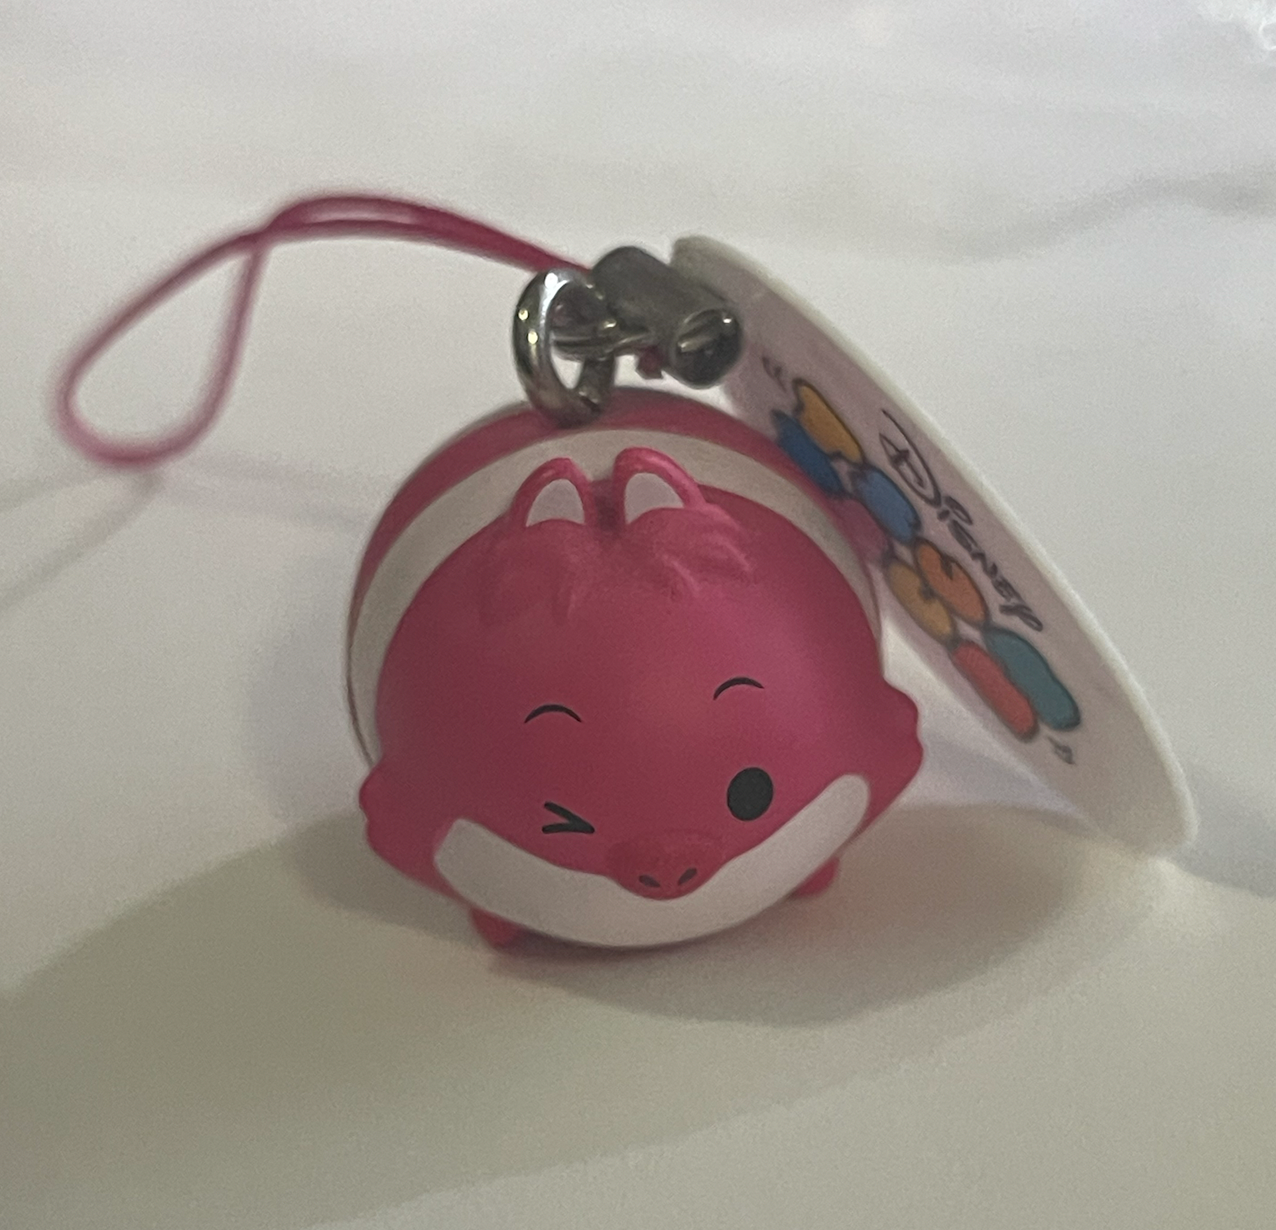 Cheshire Winking Tsum Tsum Keychains Charms by Disney - 1